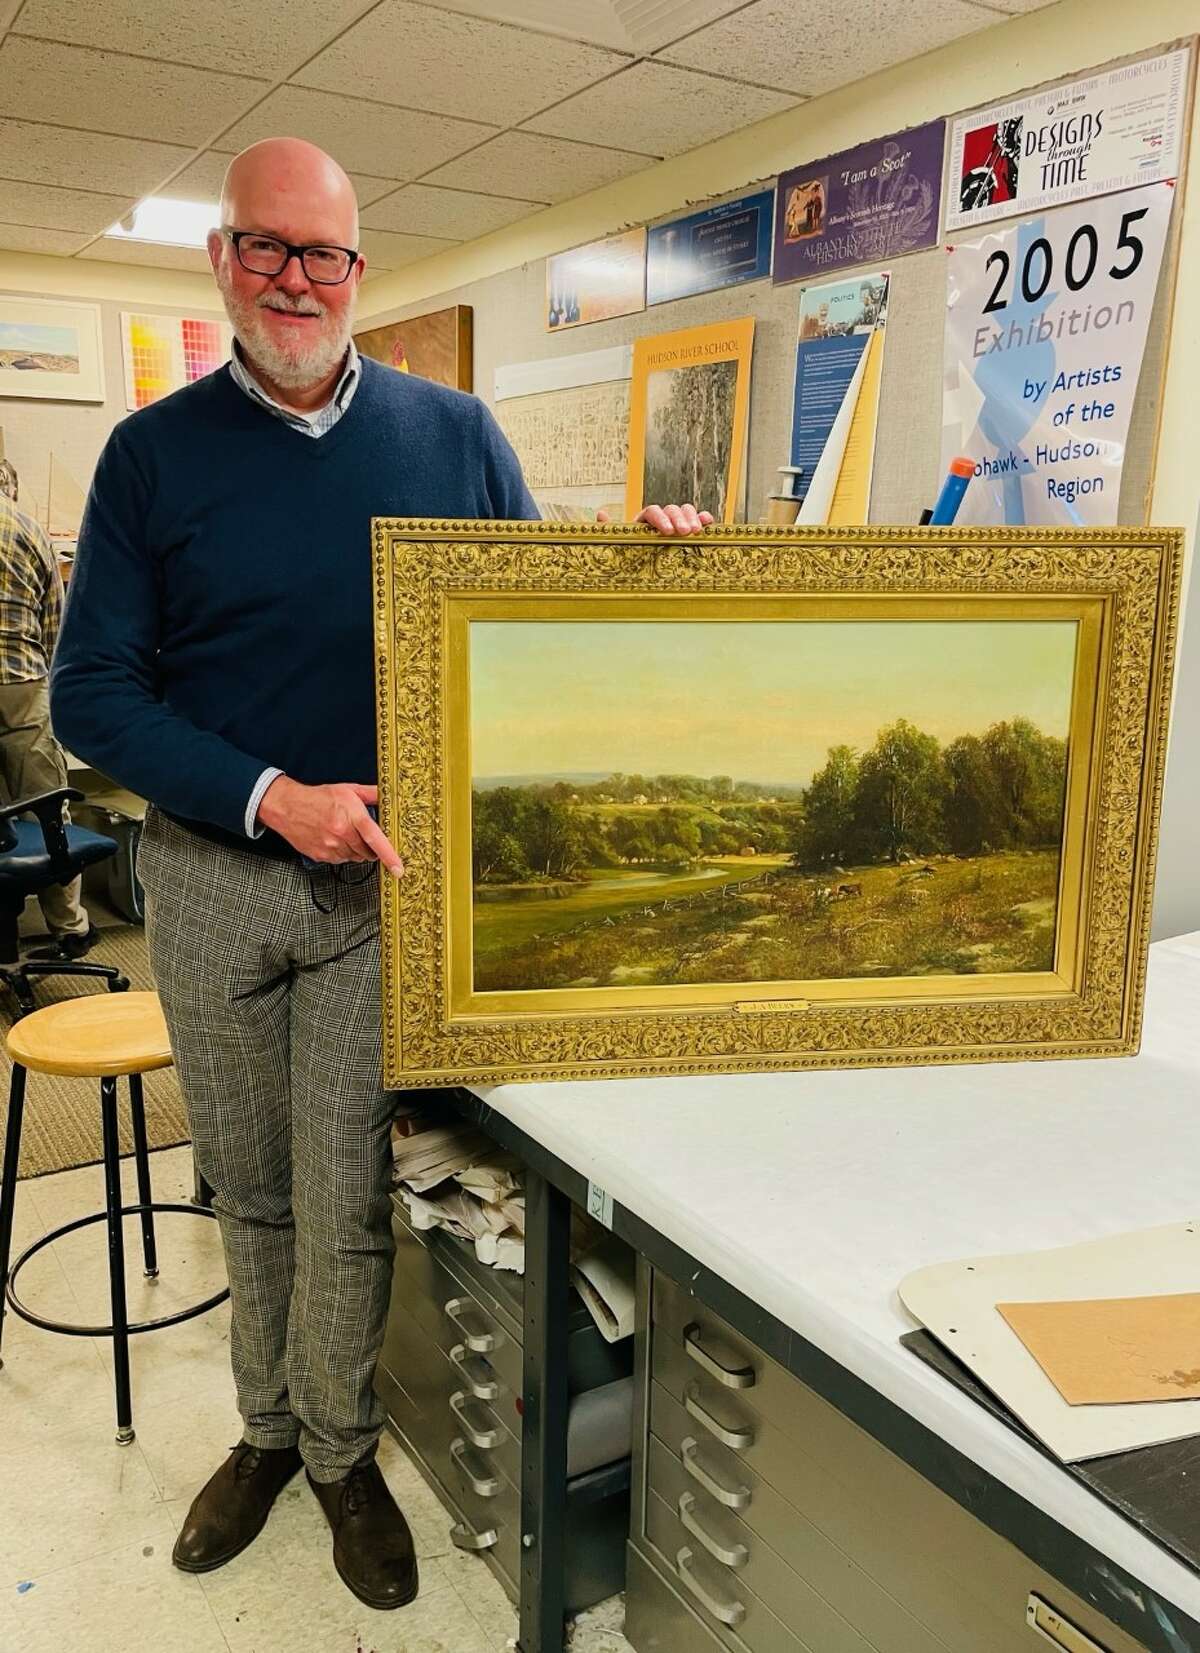 Albany Institute of History and Art Chief Curator Douglas McCombs shows a landscape painting by Julie Hart Beers. (Michelle Falkenstein)